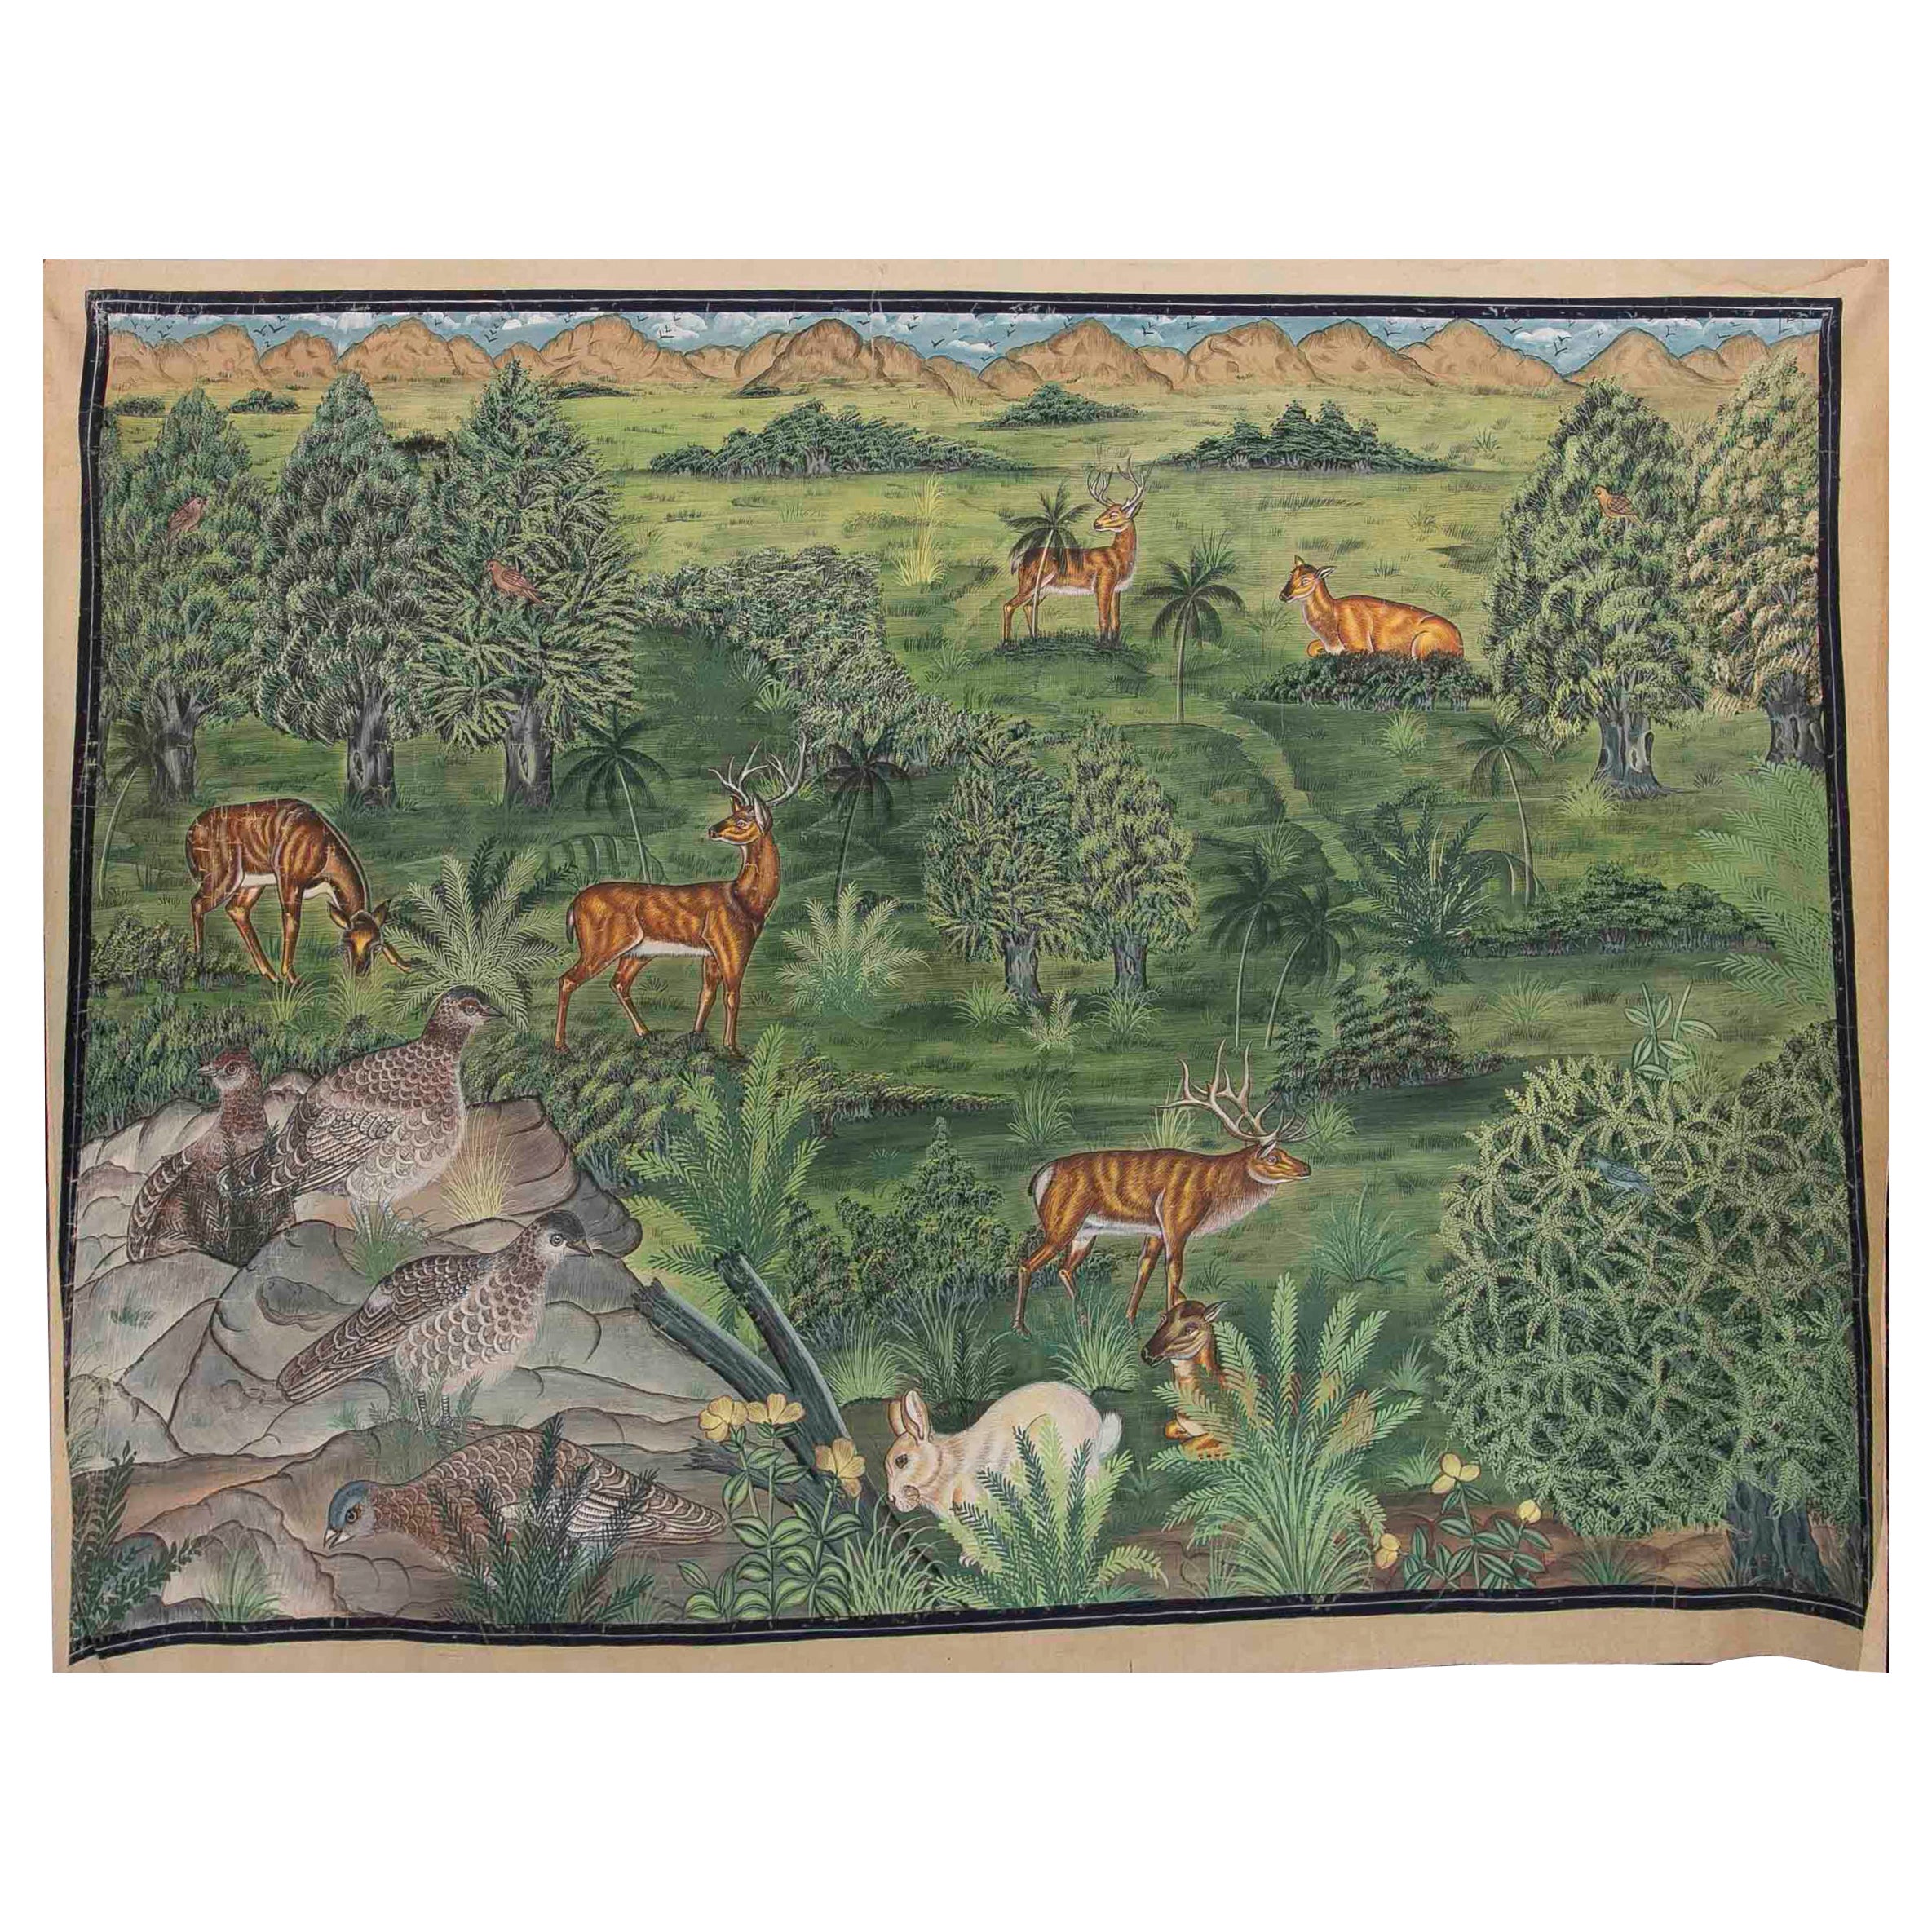 Painting on Canvas of a Landscape with Flowers and Animals Such as Deer For Sale